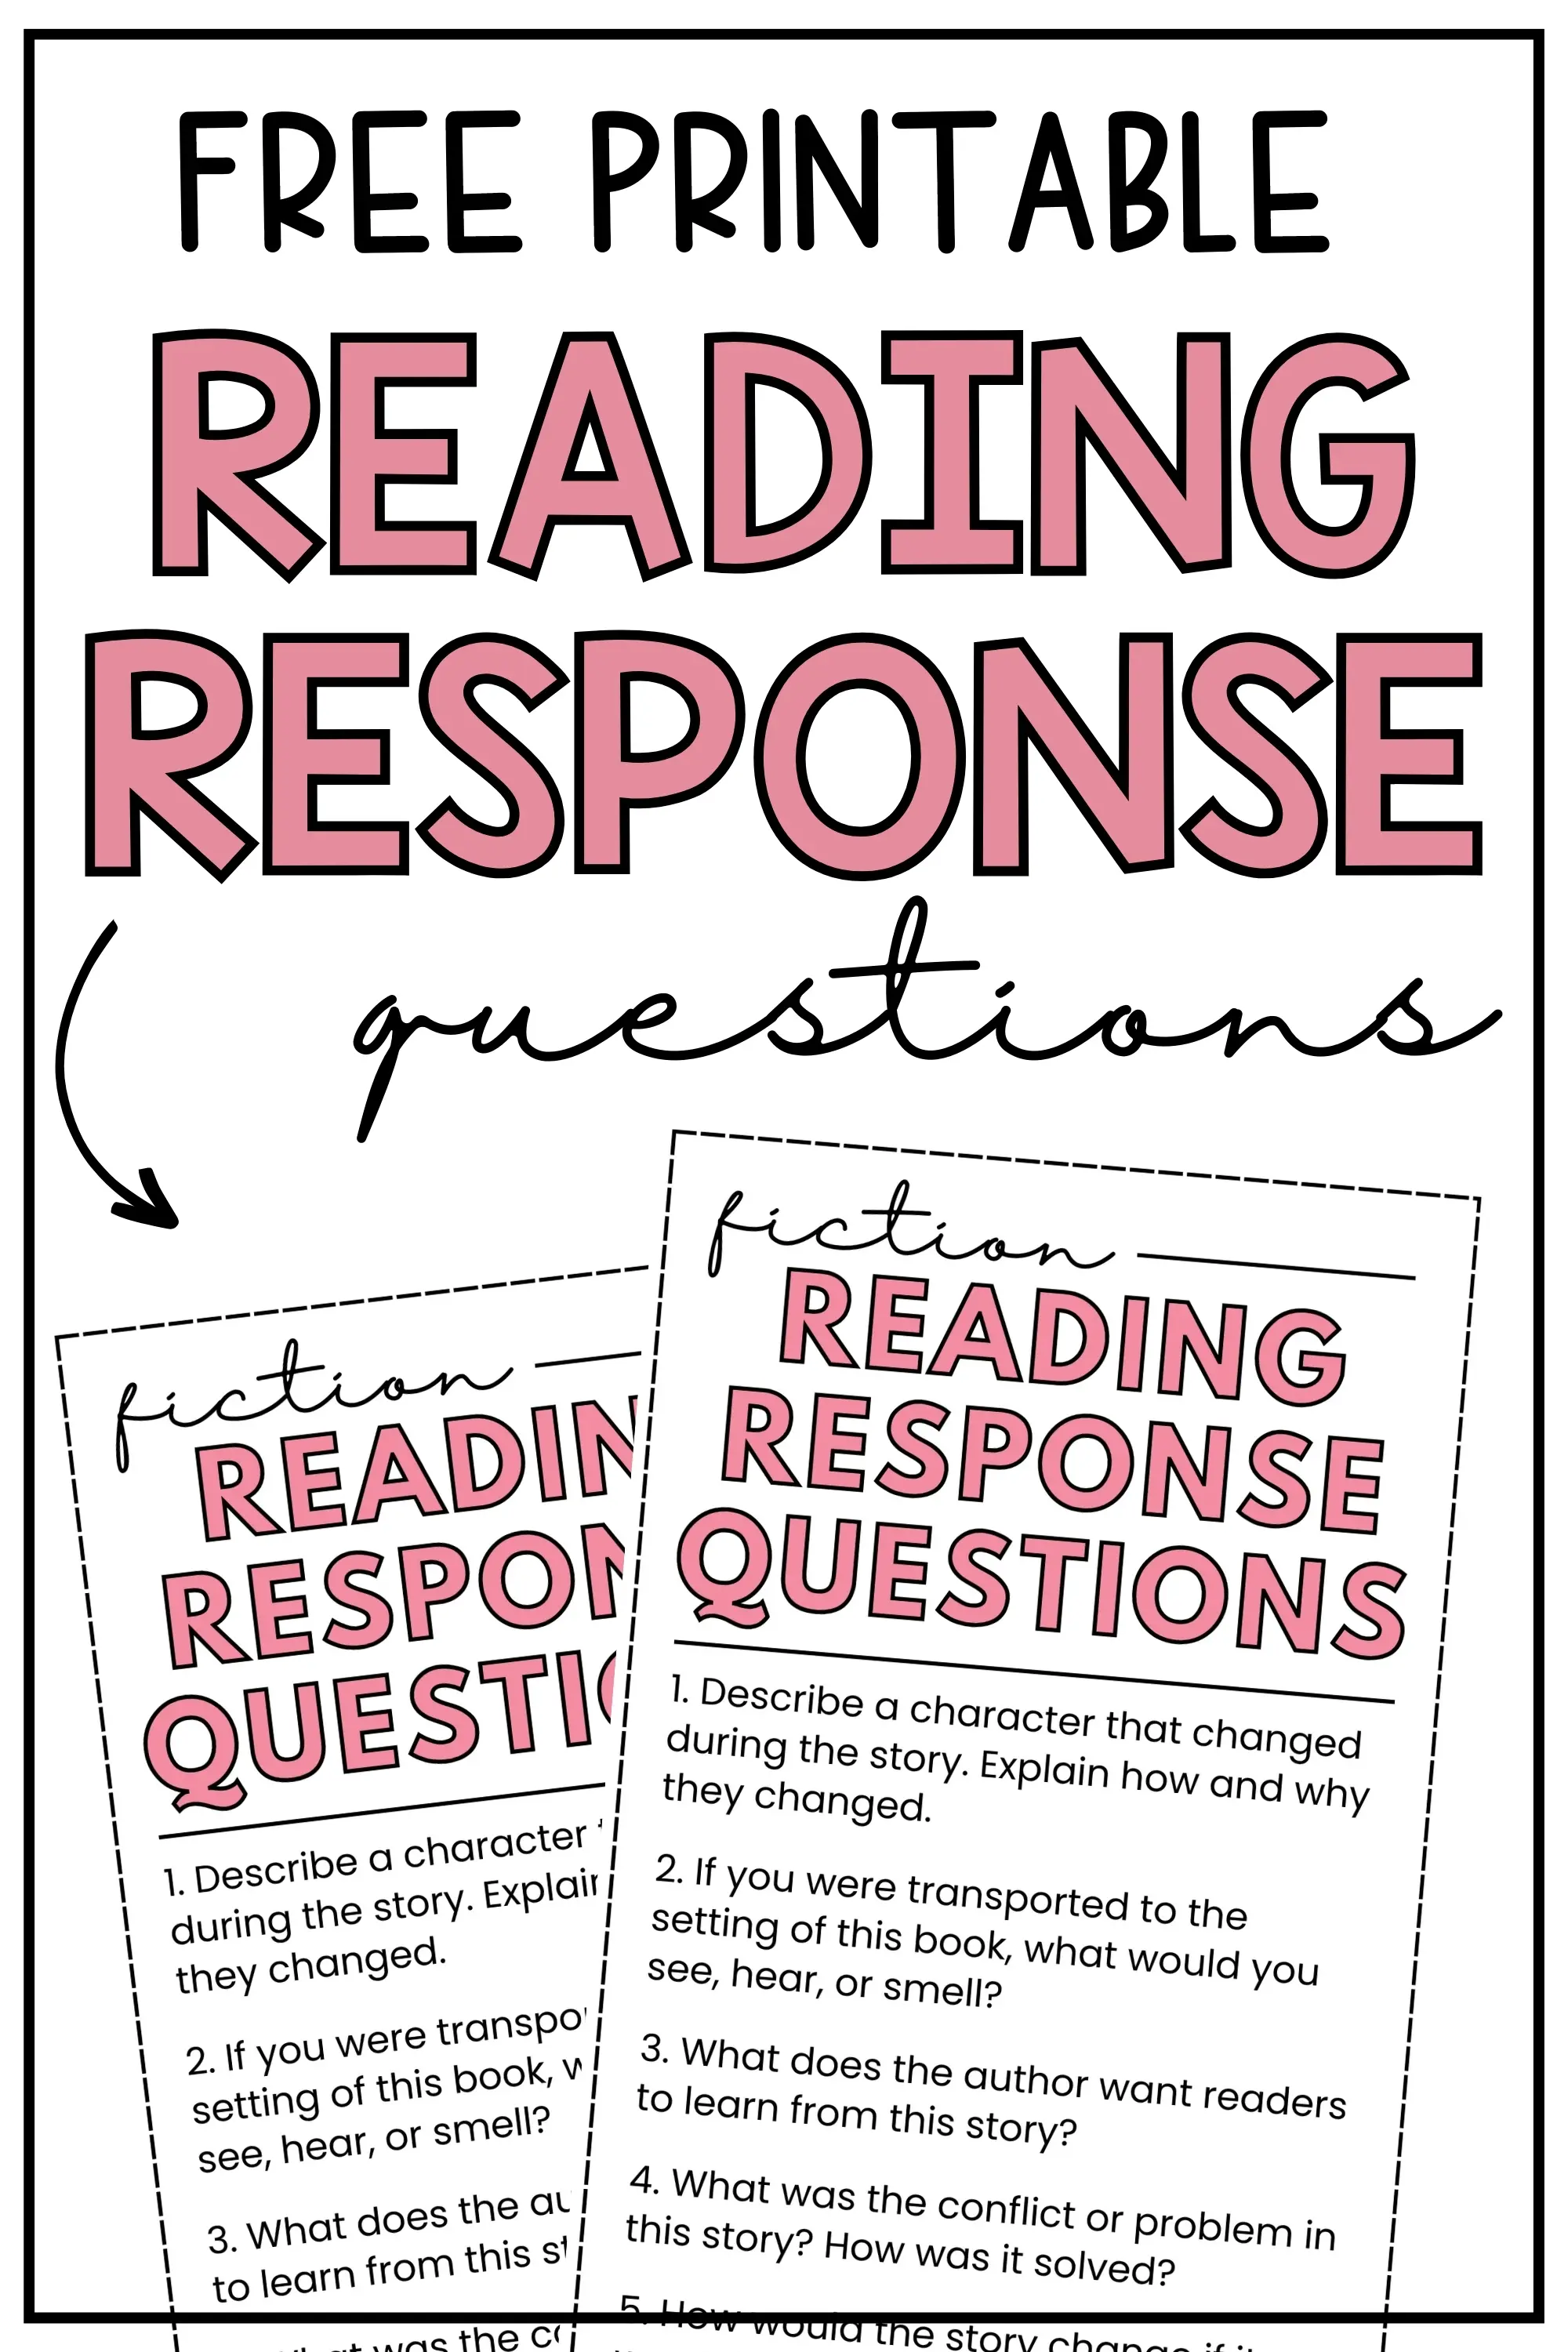 Reading Response Questions For Any Book PDF